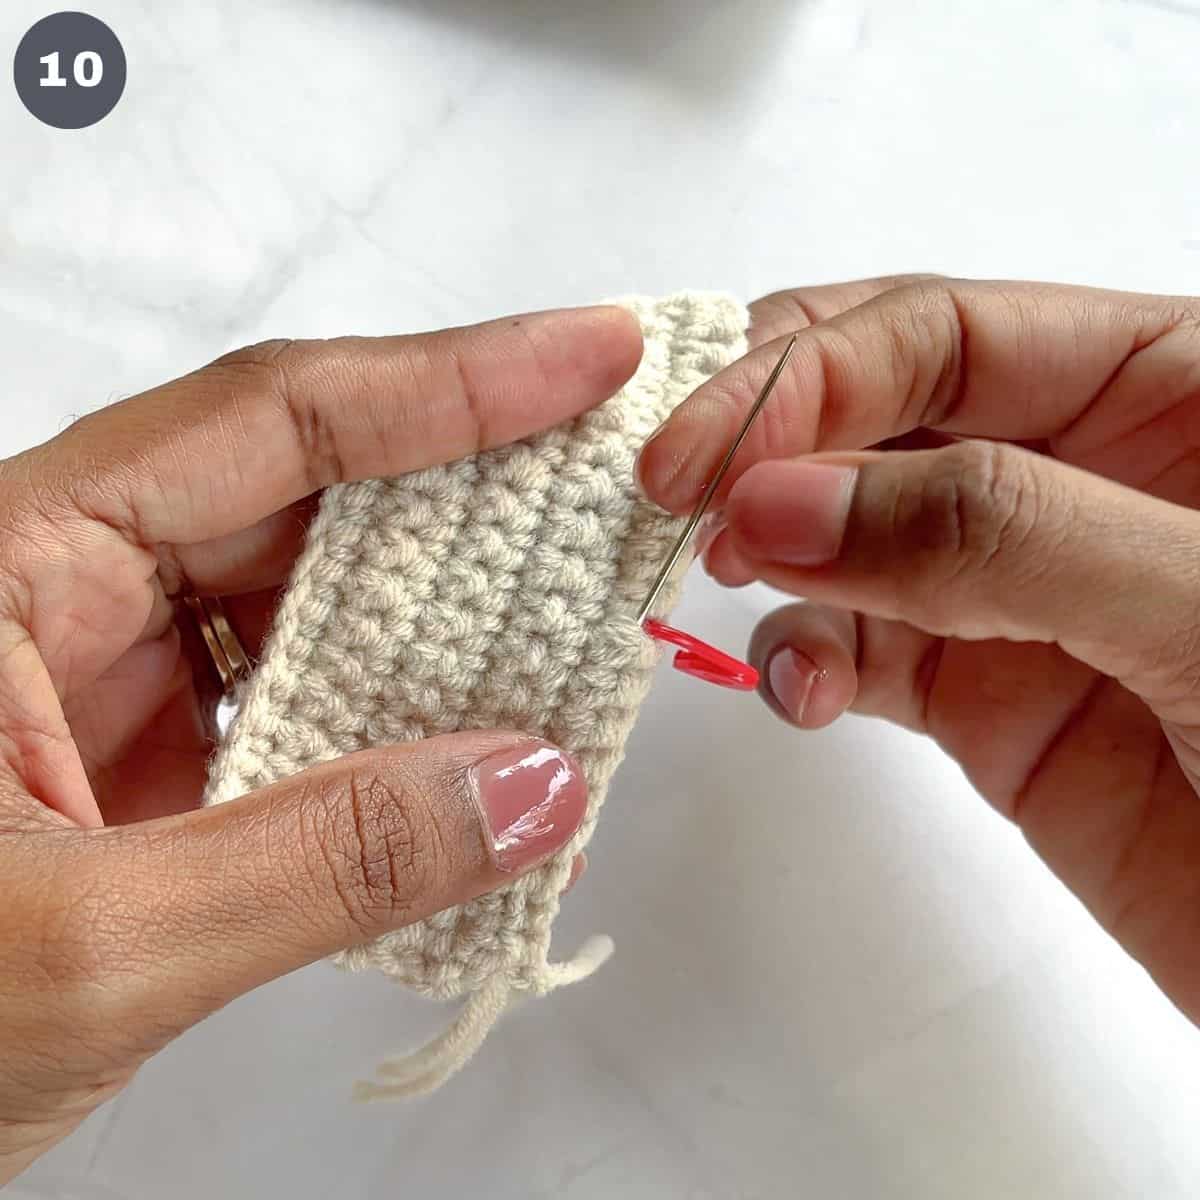 Threading yarn to the center of a crocheted rectangle.